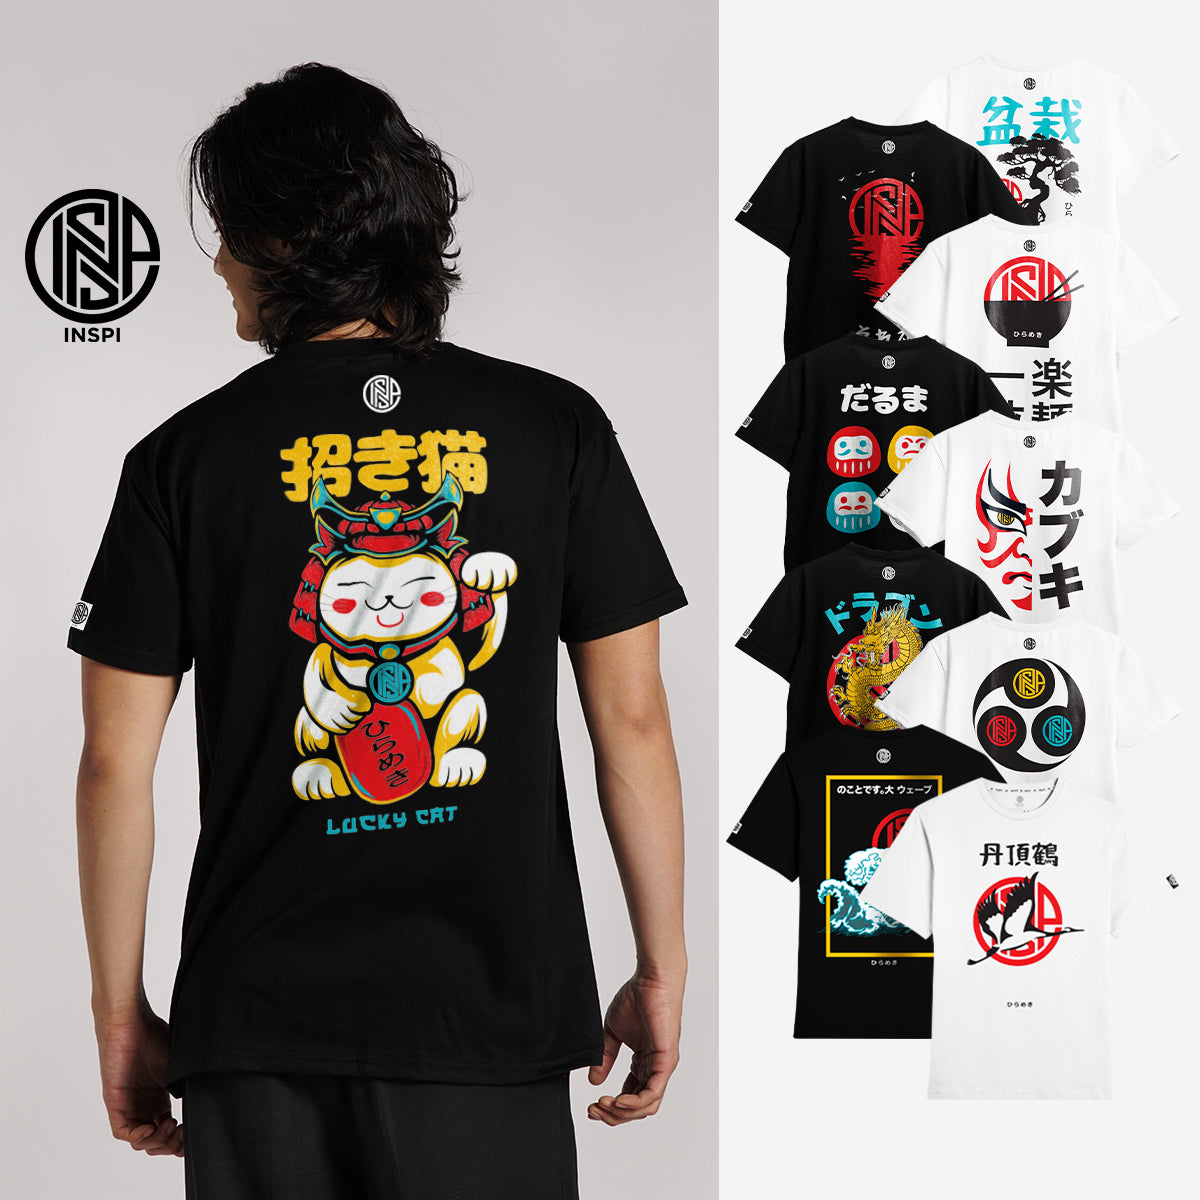 INSPI Minimal Oriental Japanese Daruma Dolls T Shirt for Men Trendy Tops for Women Casual Printed Graphic Tee Collection Casual Tshirts